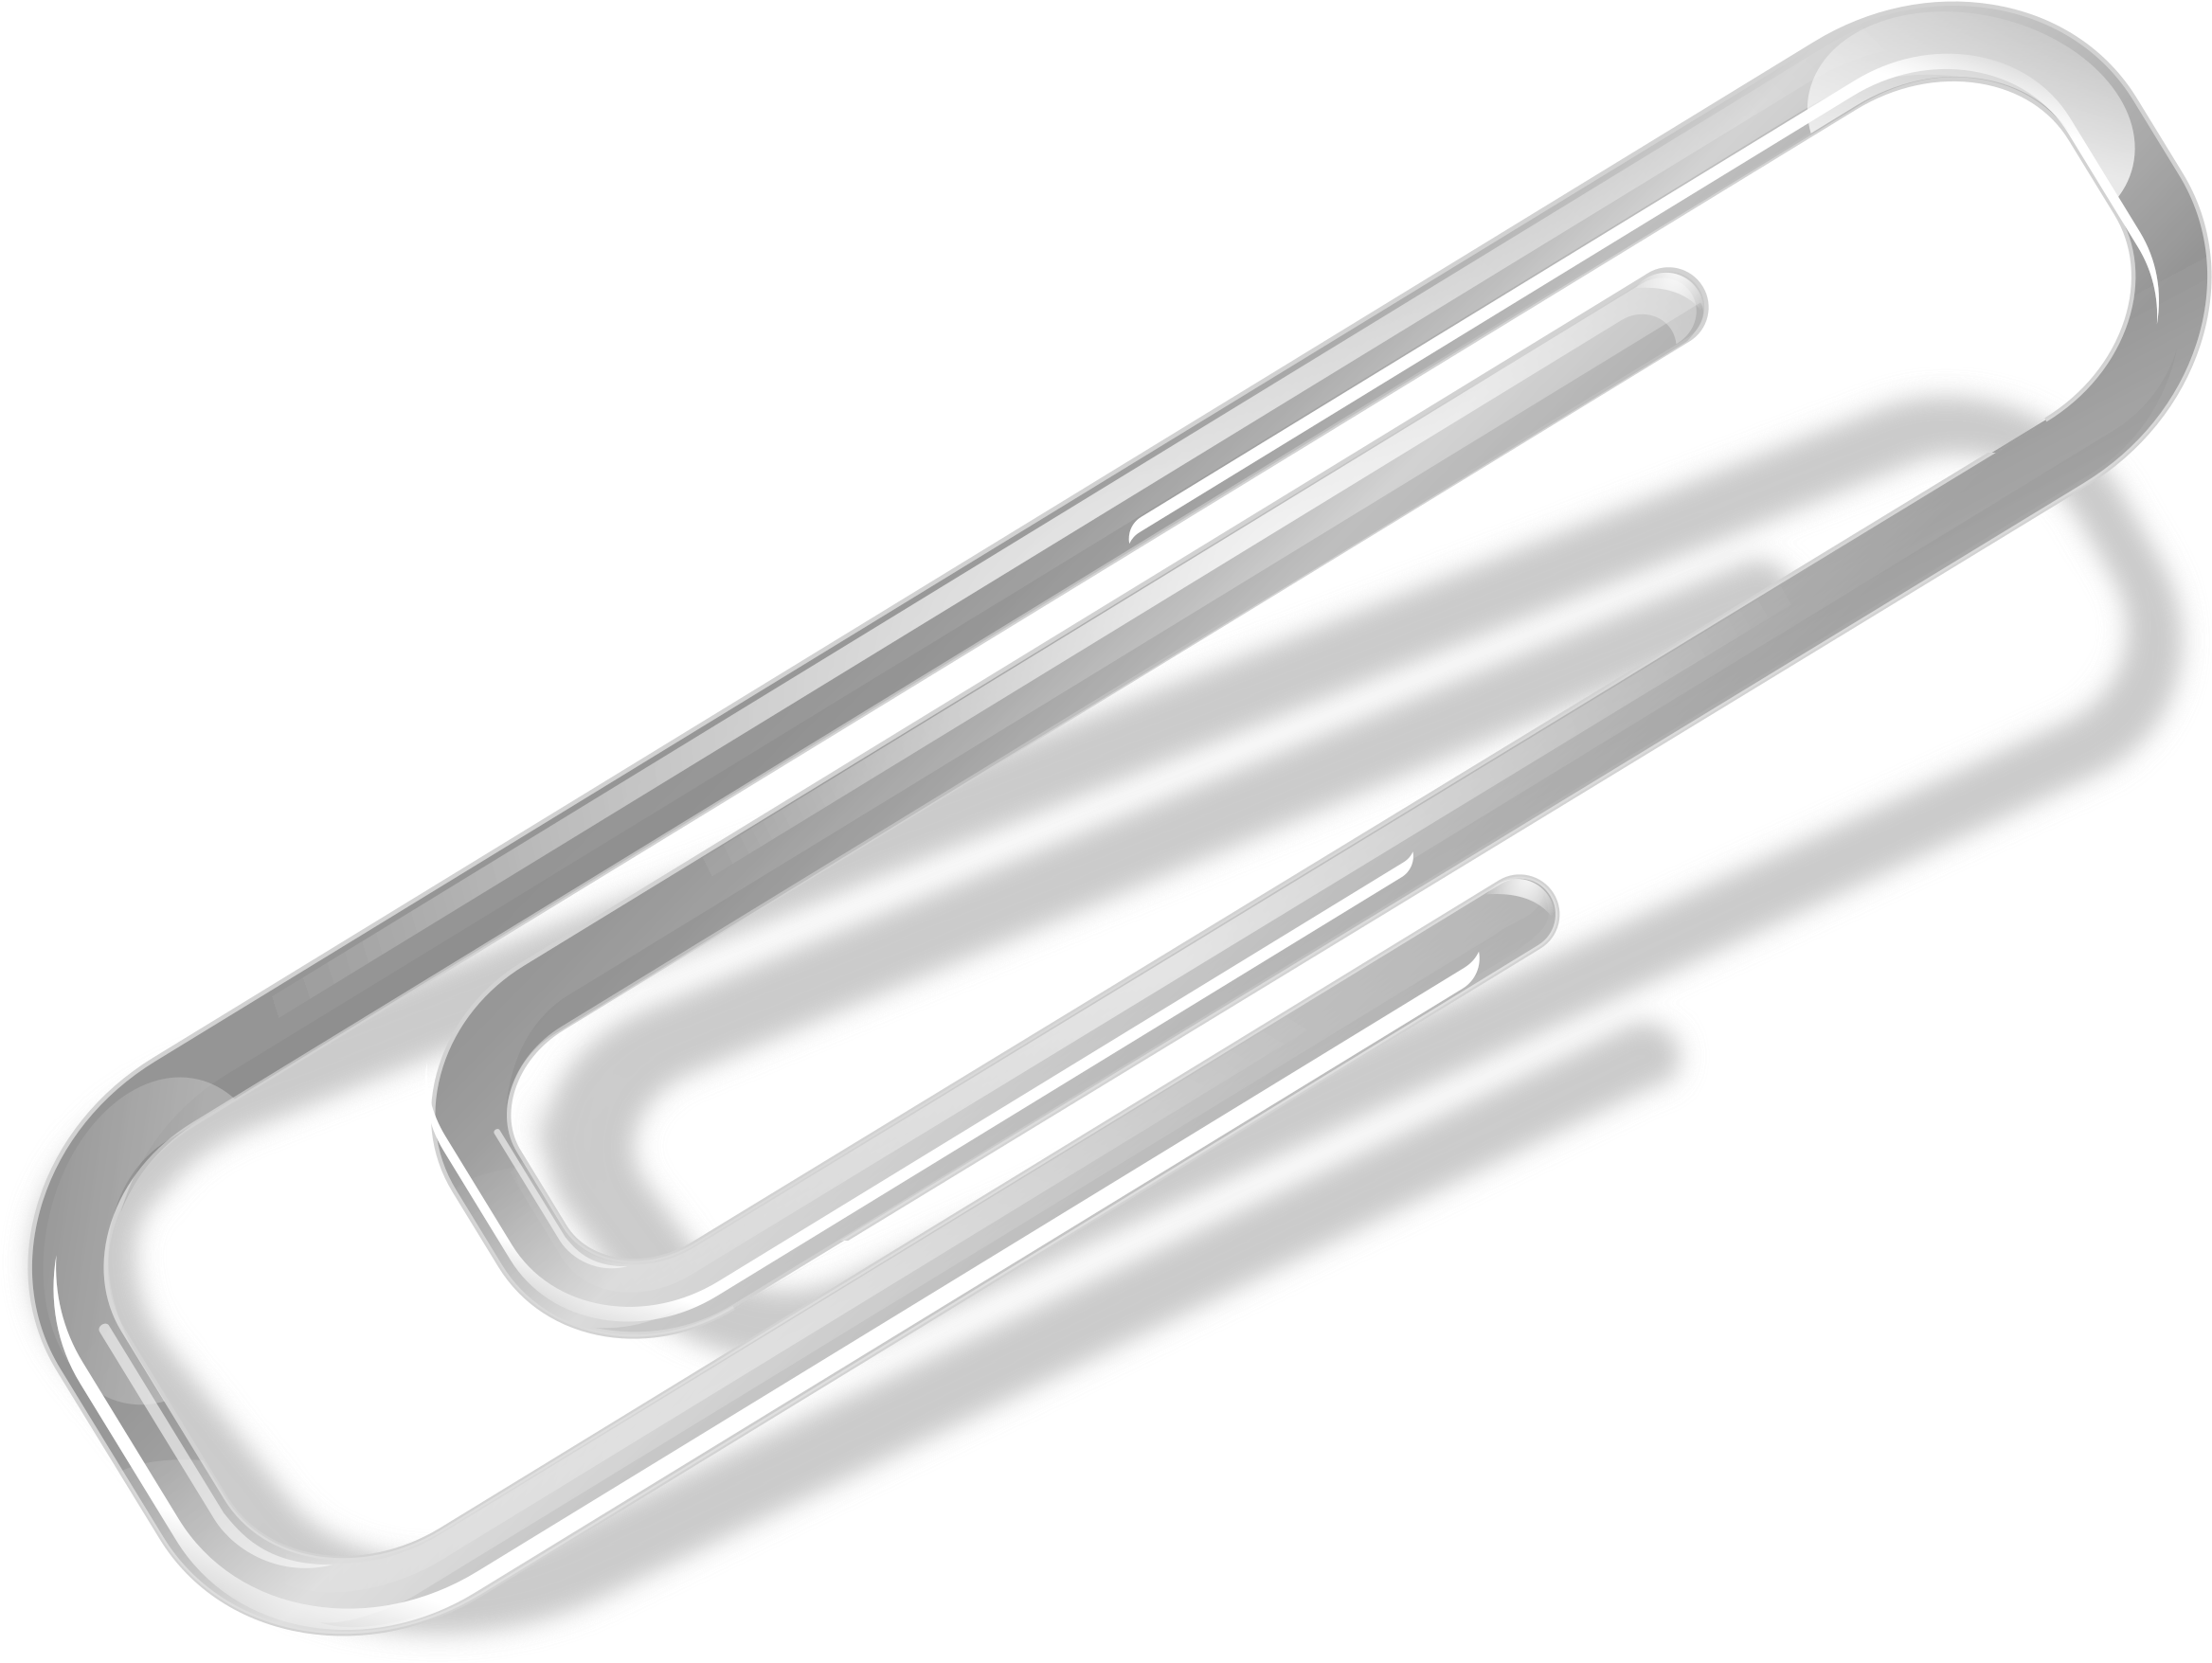 A White Paperclips On A Black Background